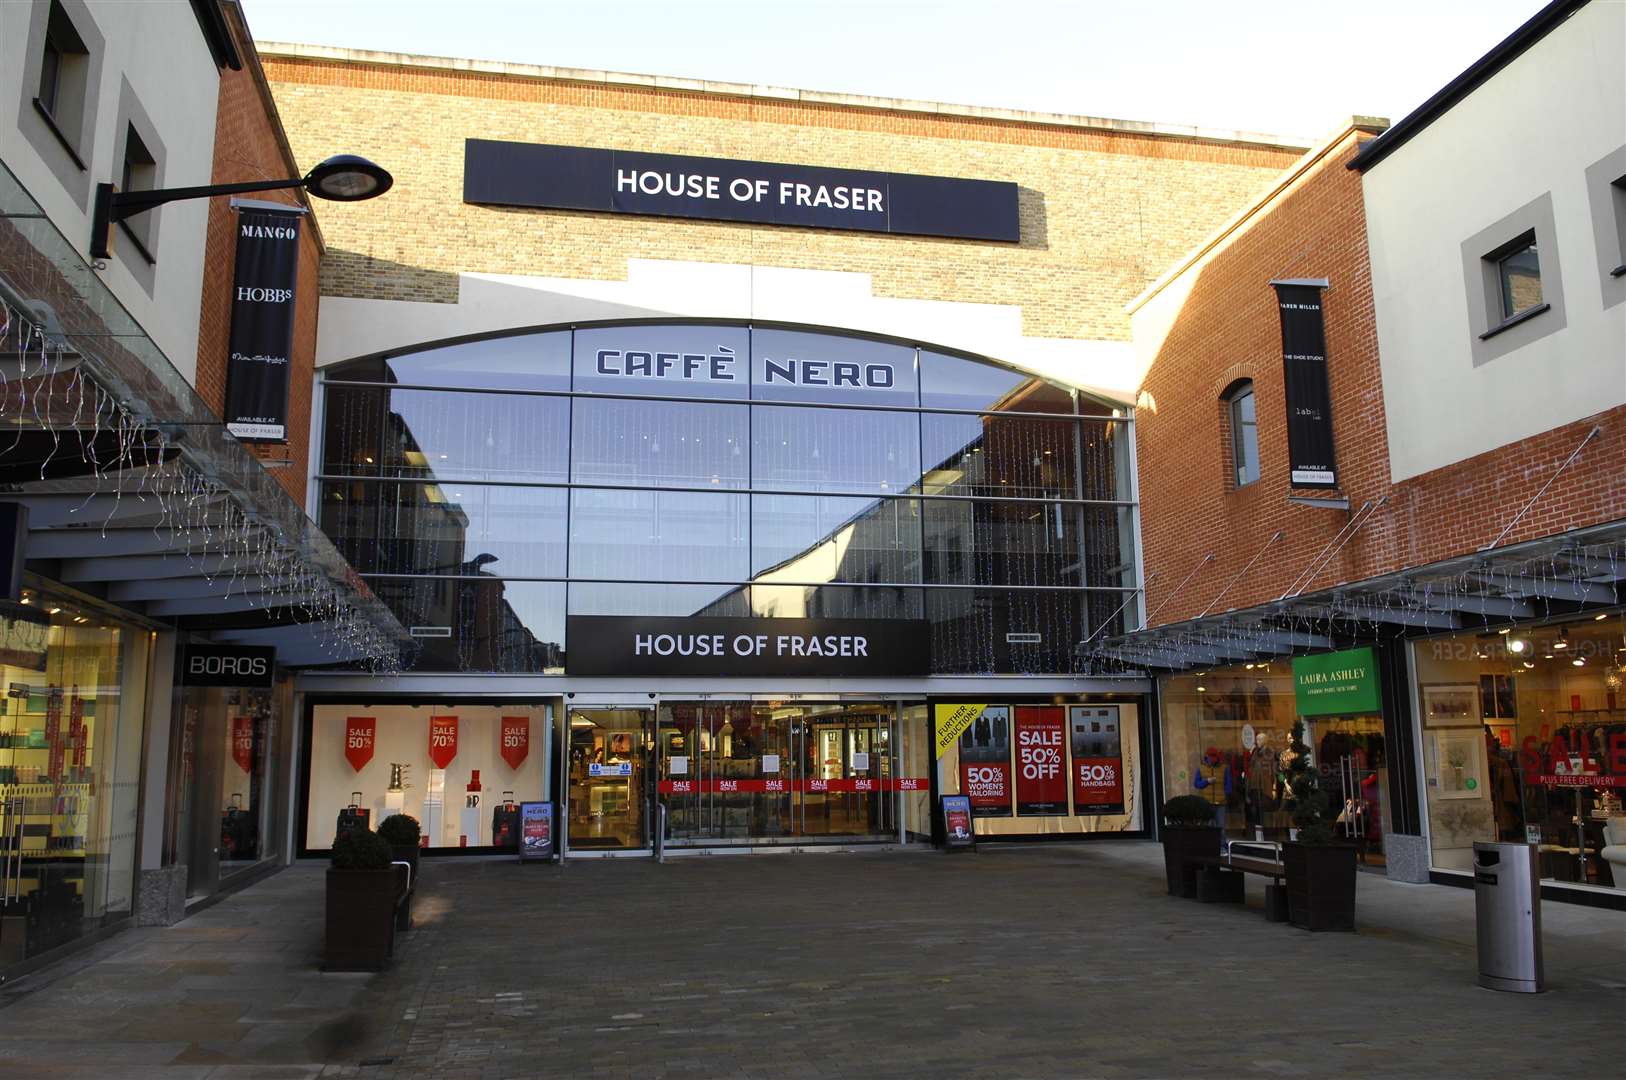 Coast concession in House of Fraser in Maidstone is likely to survive